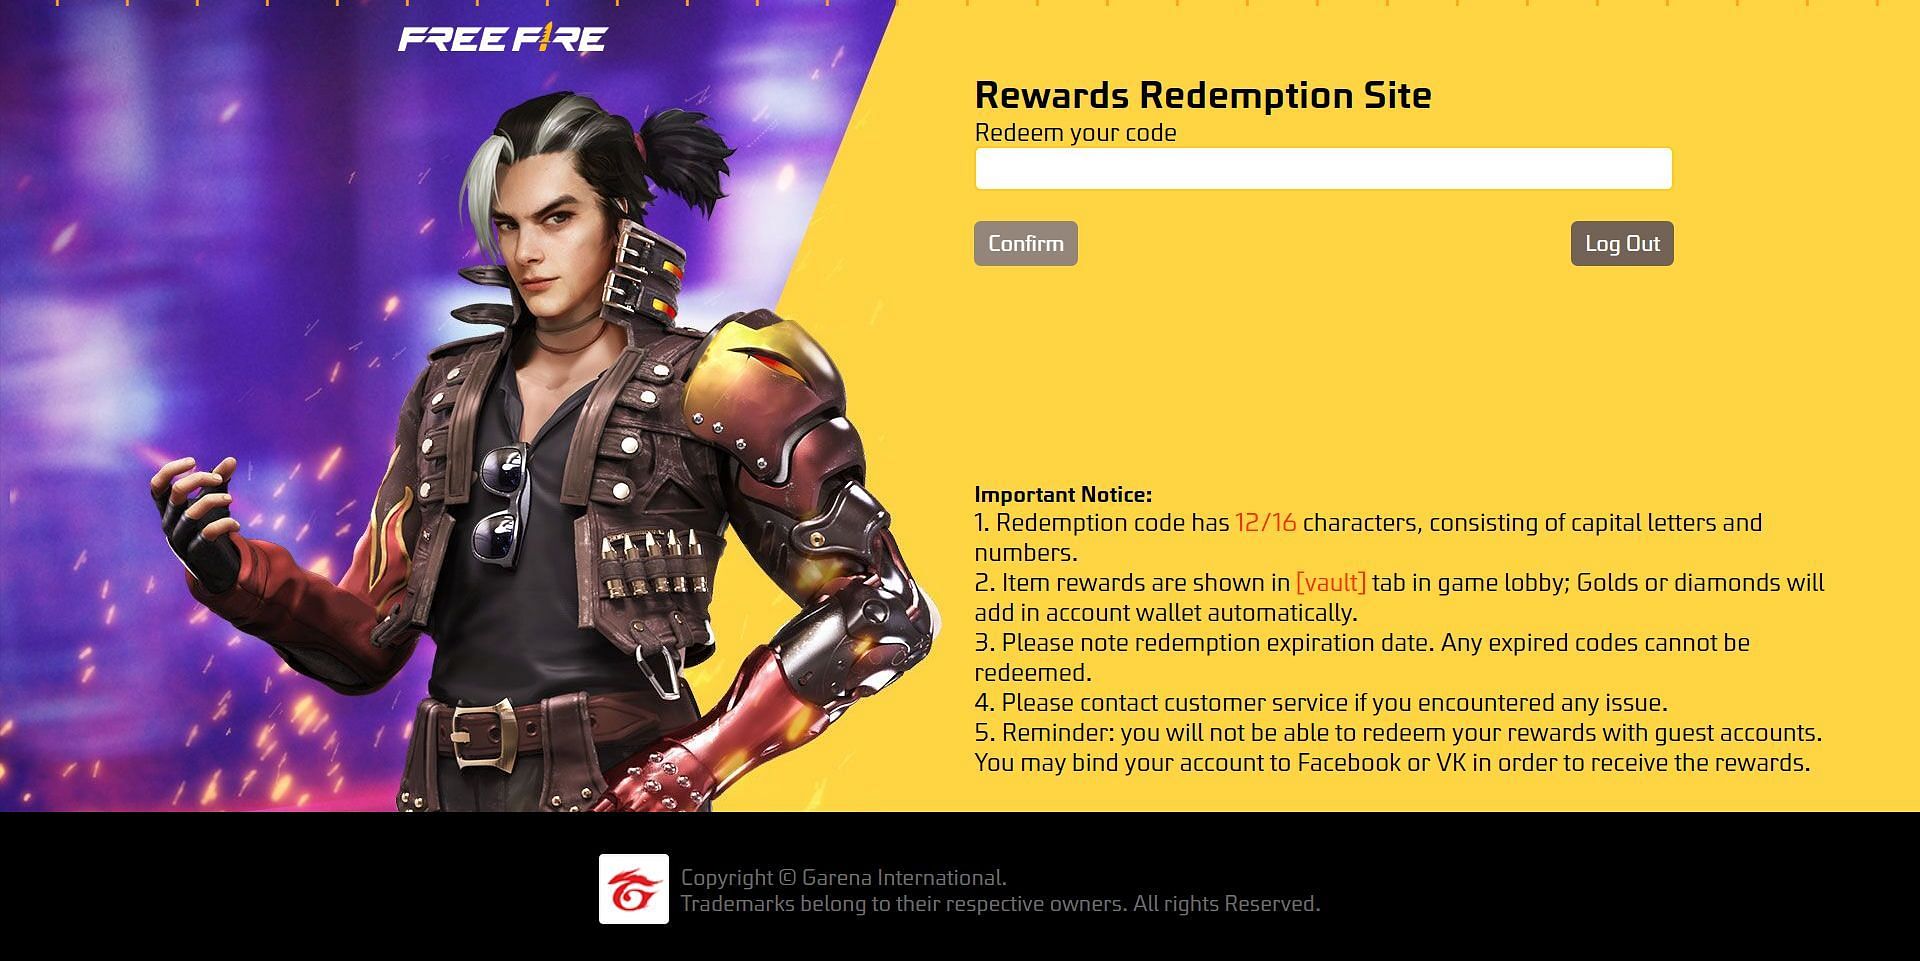 Enter the code accurately into the text field and click confirm (Image via Garena)